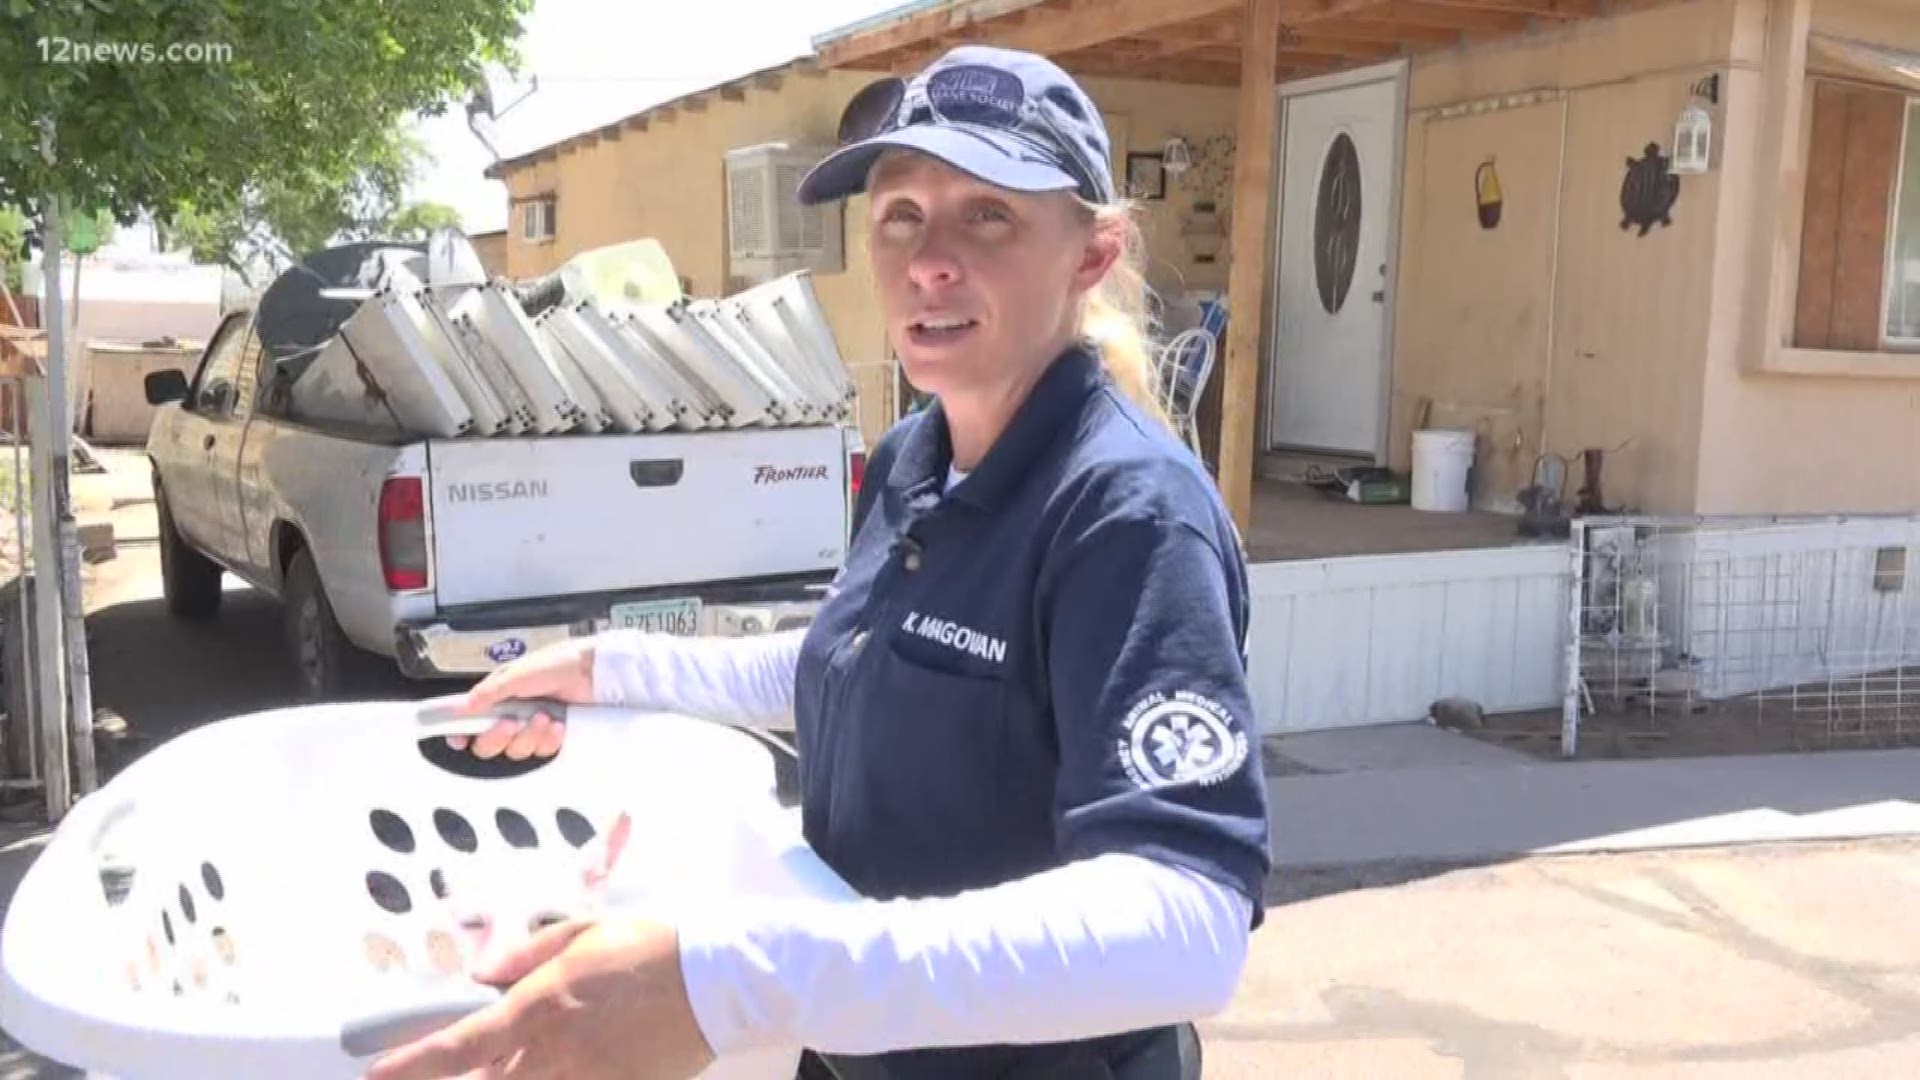 EMTs work to help animals who are suffering from heat issues or kept in potentially dangerous situations.